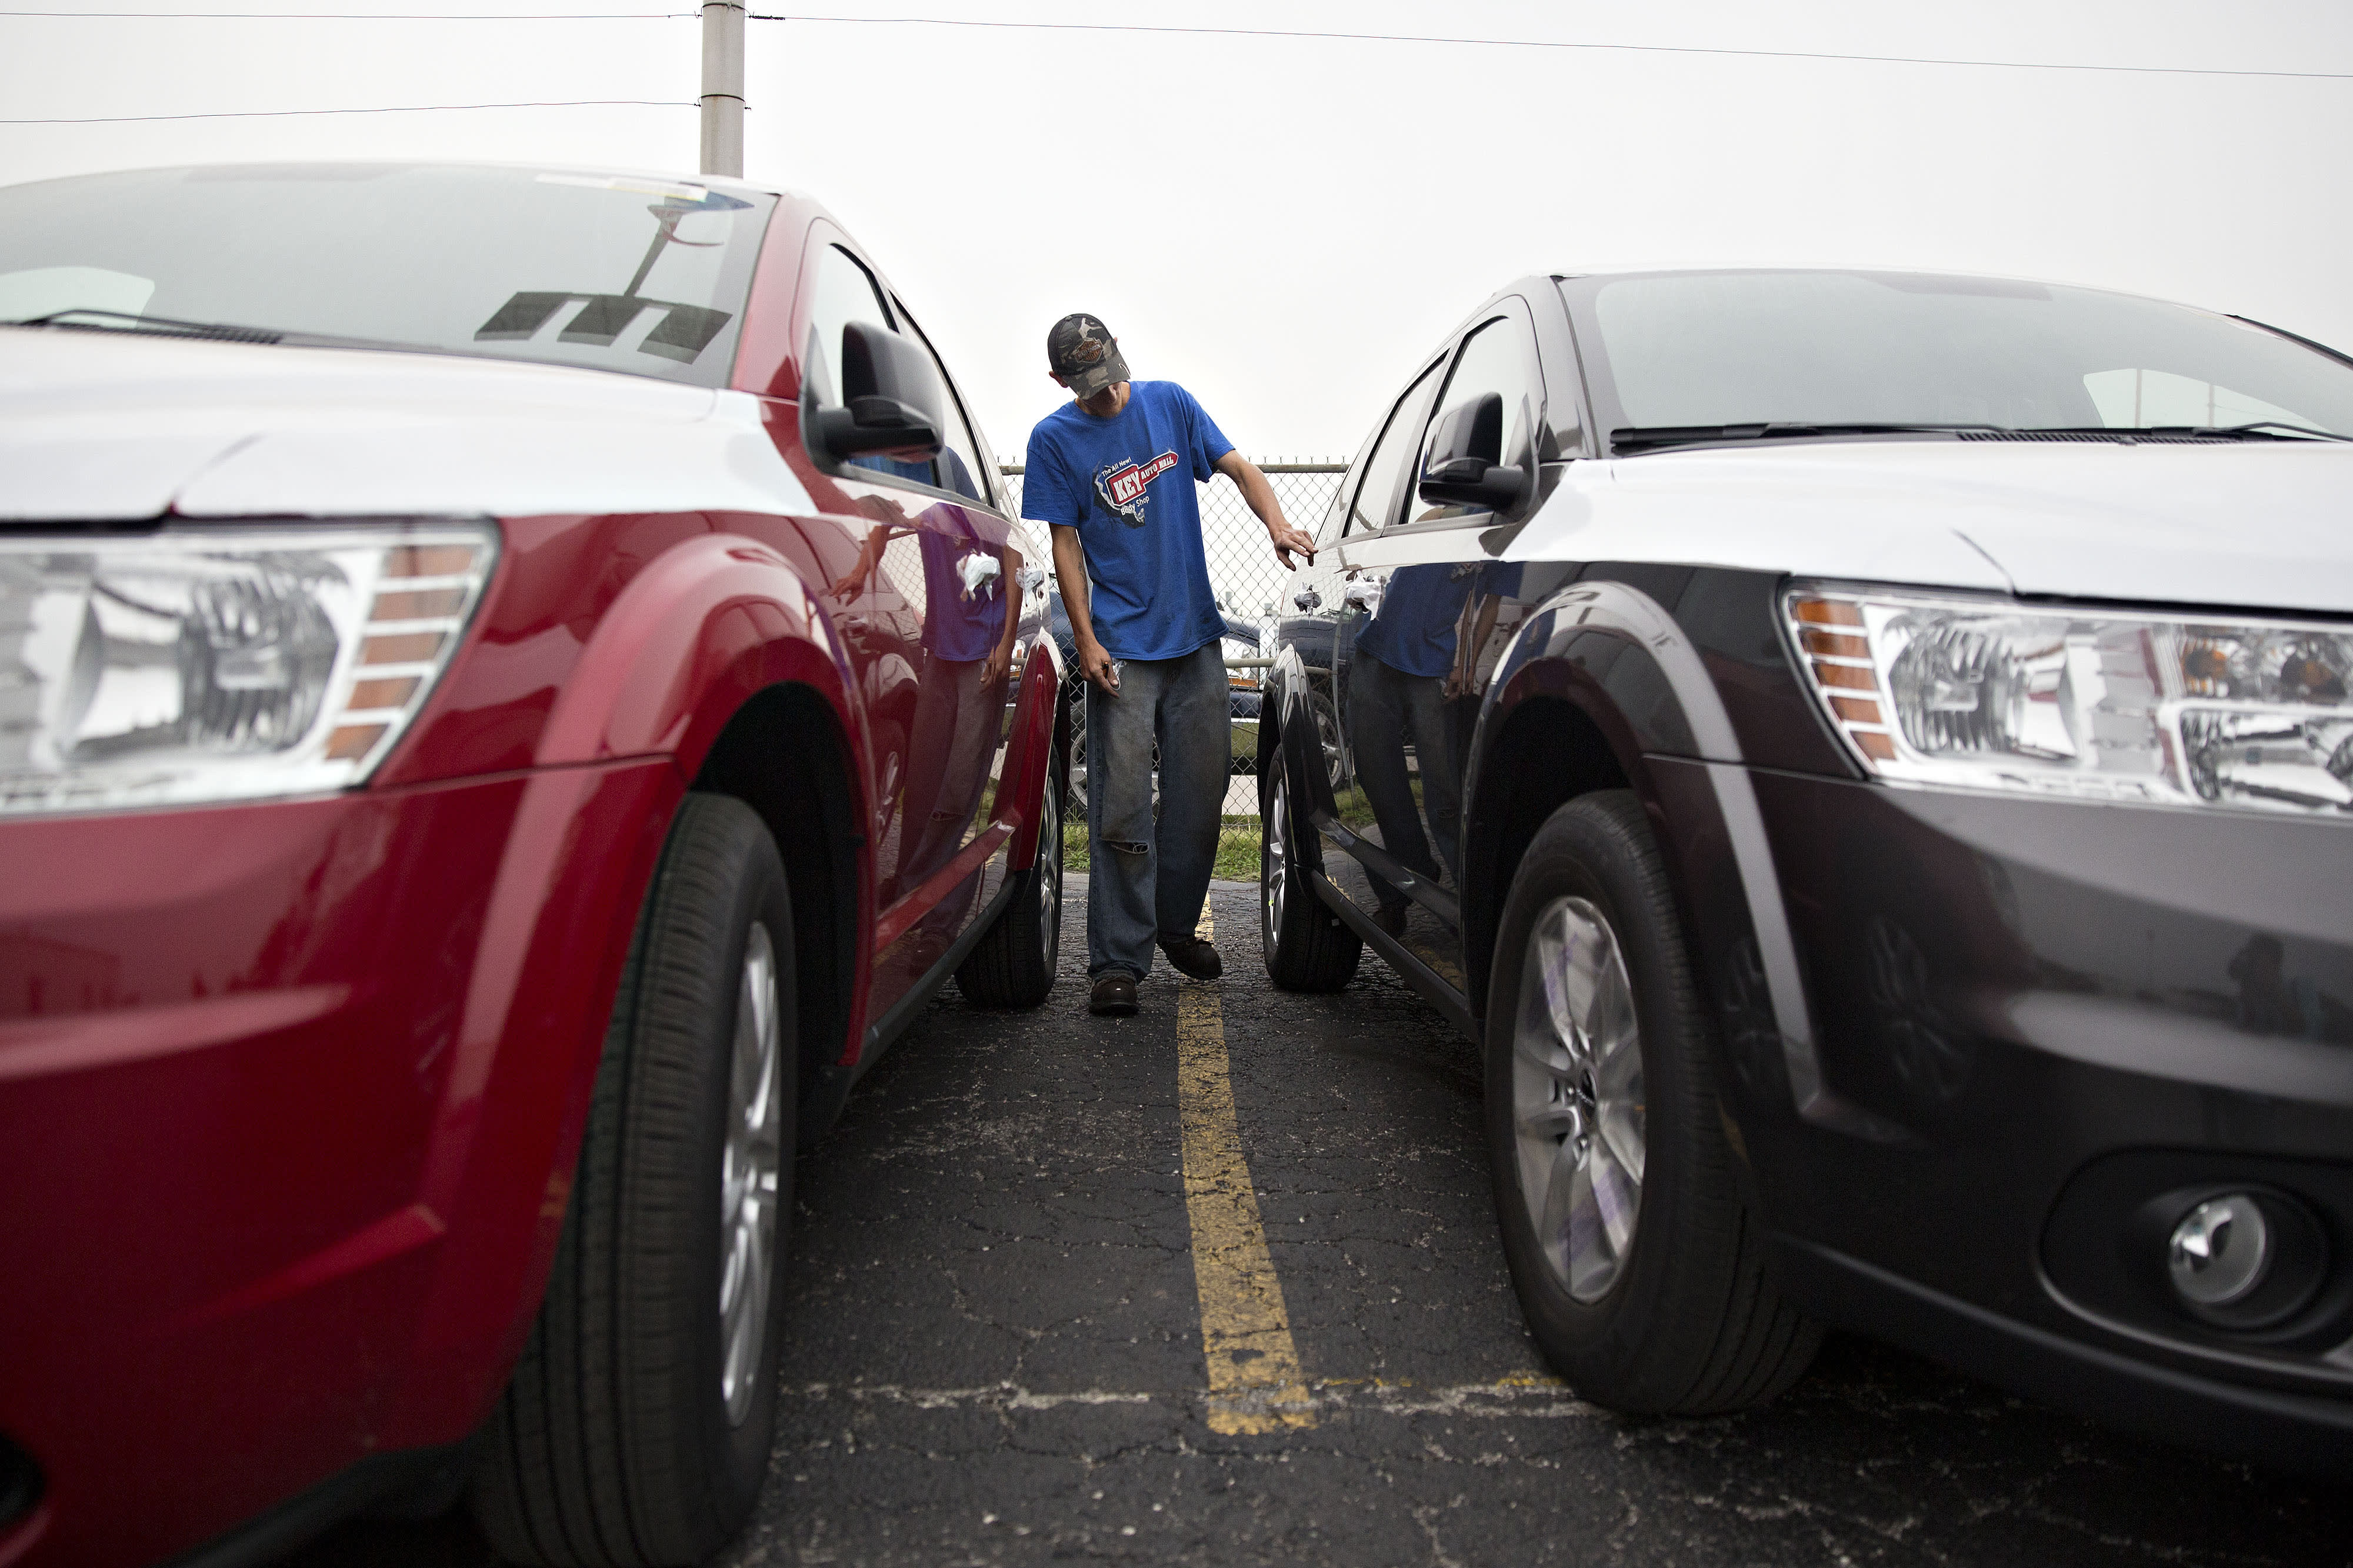 High prices, few discounts and low inventory await car shoppers